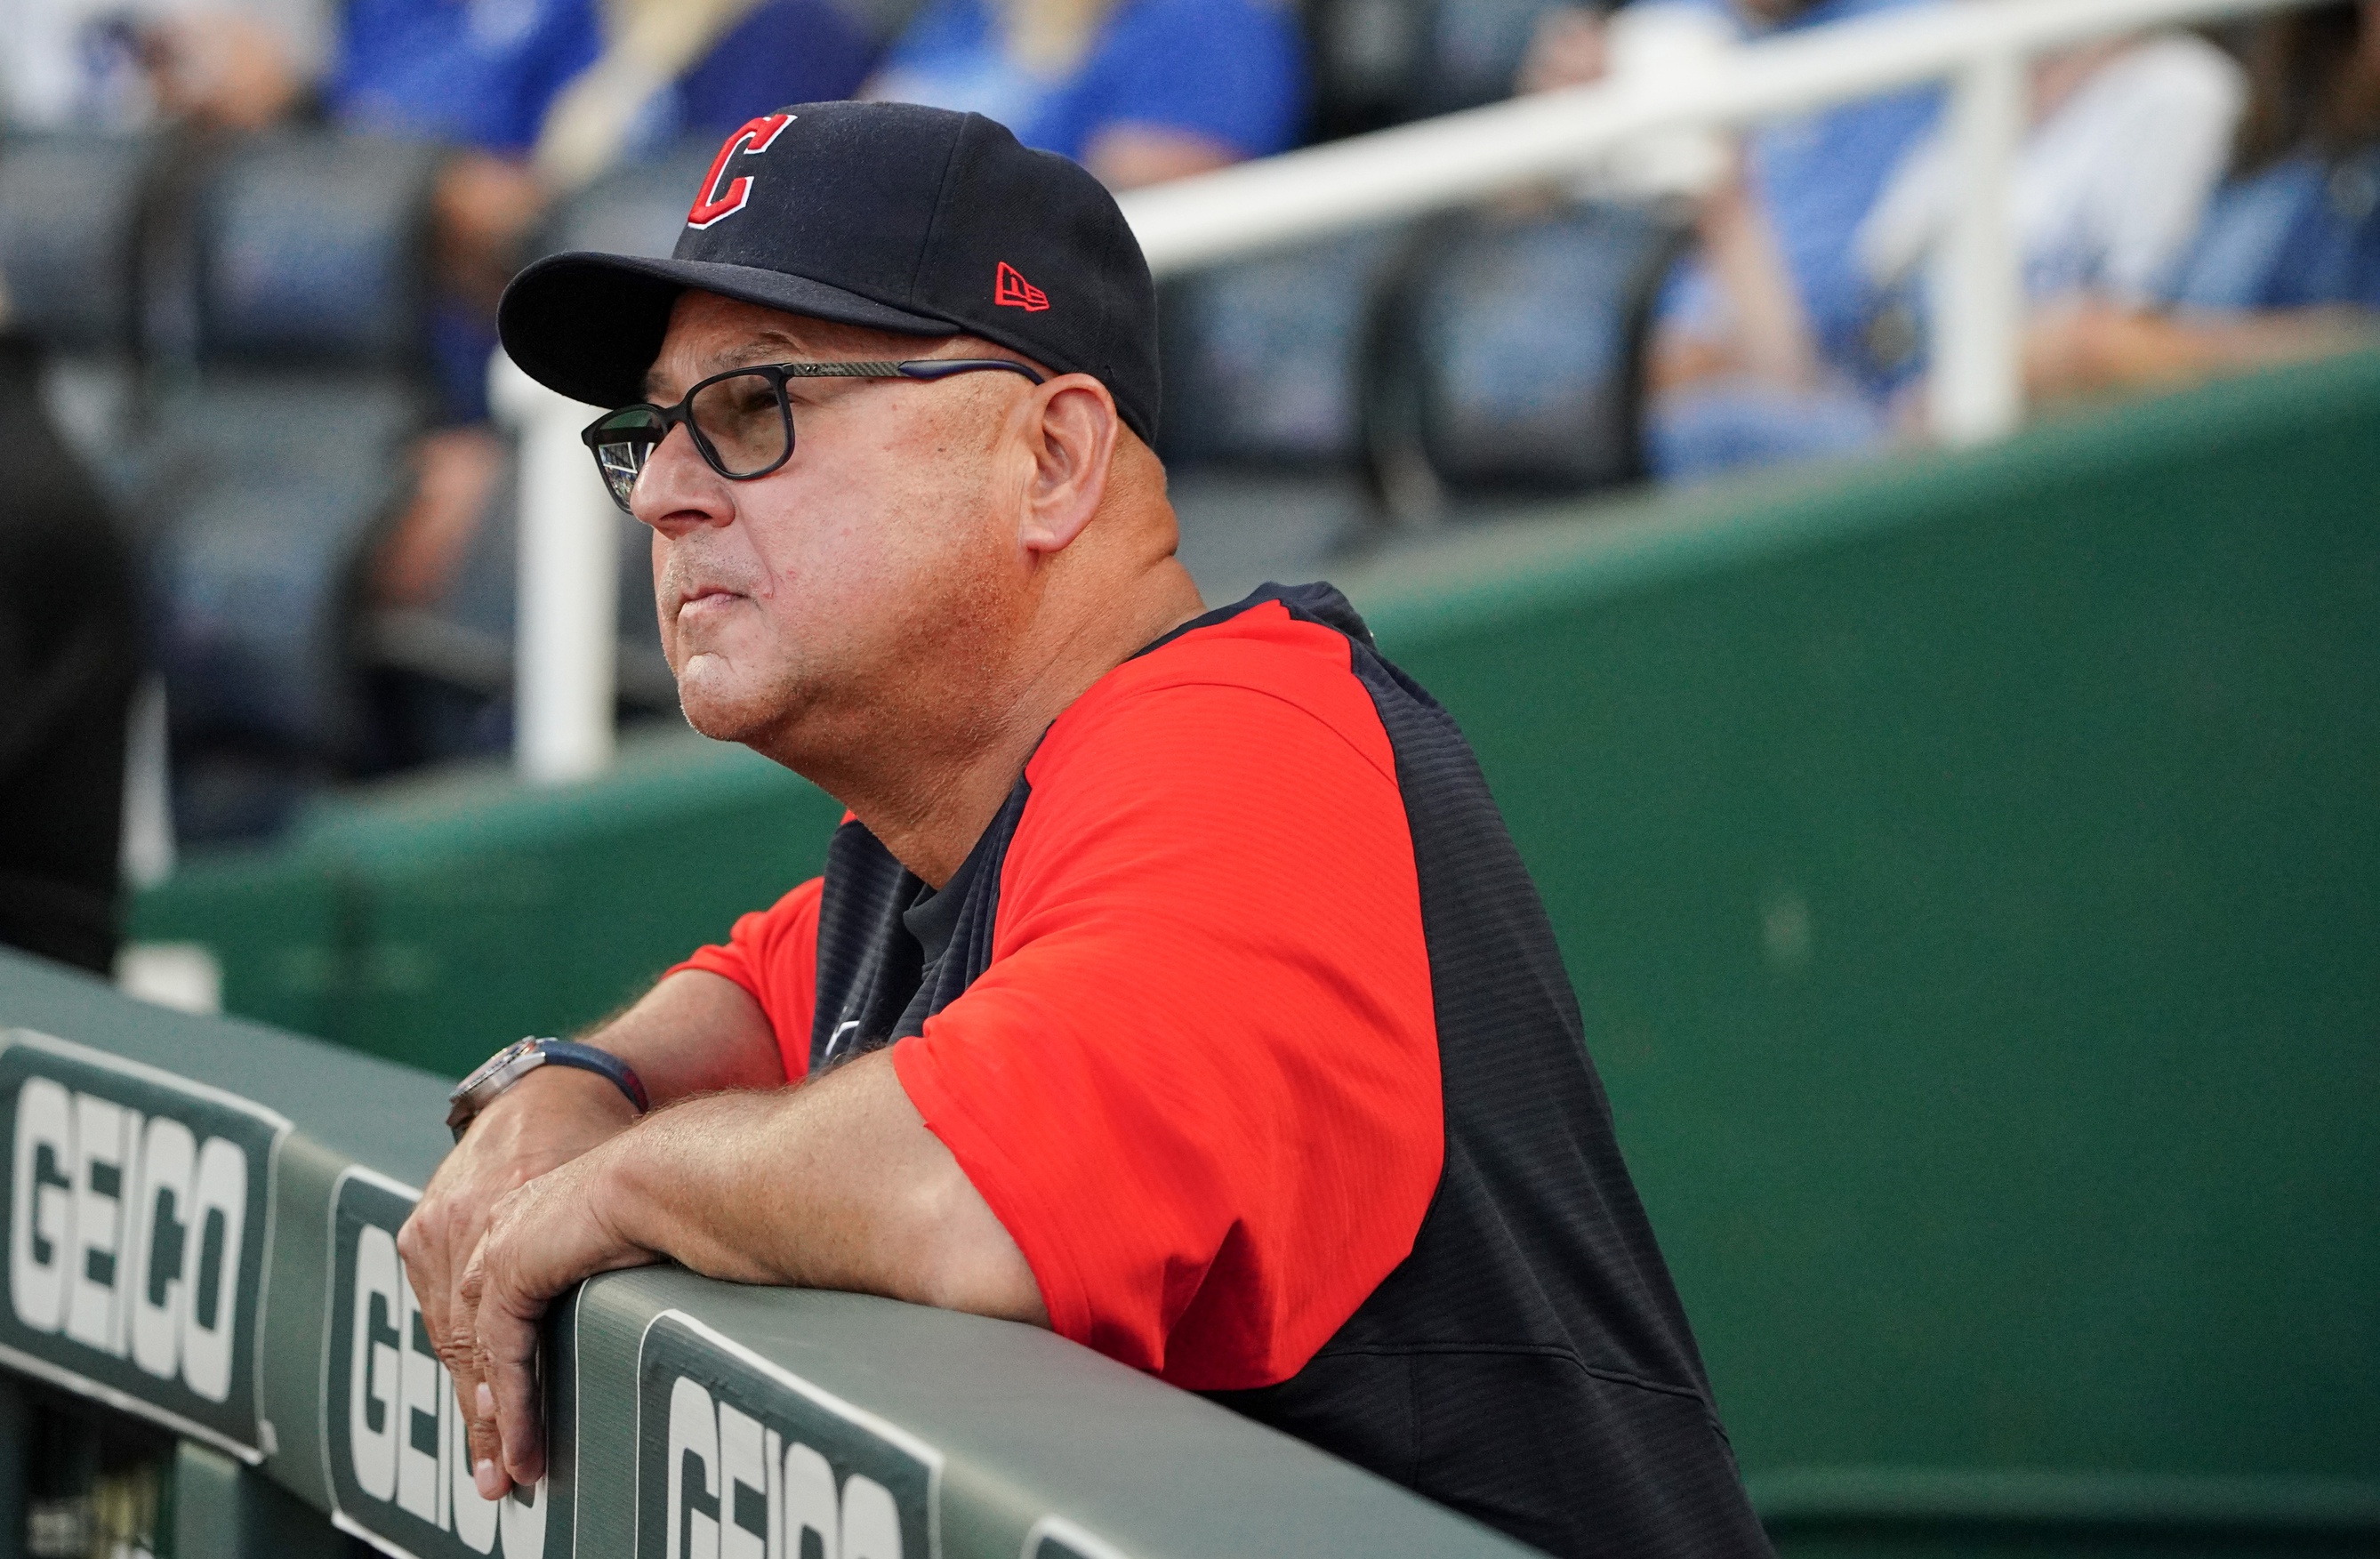 WATCH: Managers Terry Francona, Phil Nevin Ejected on the Same Play